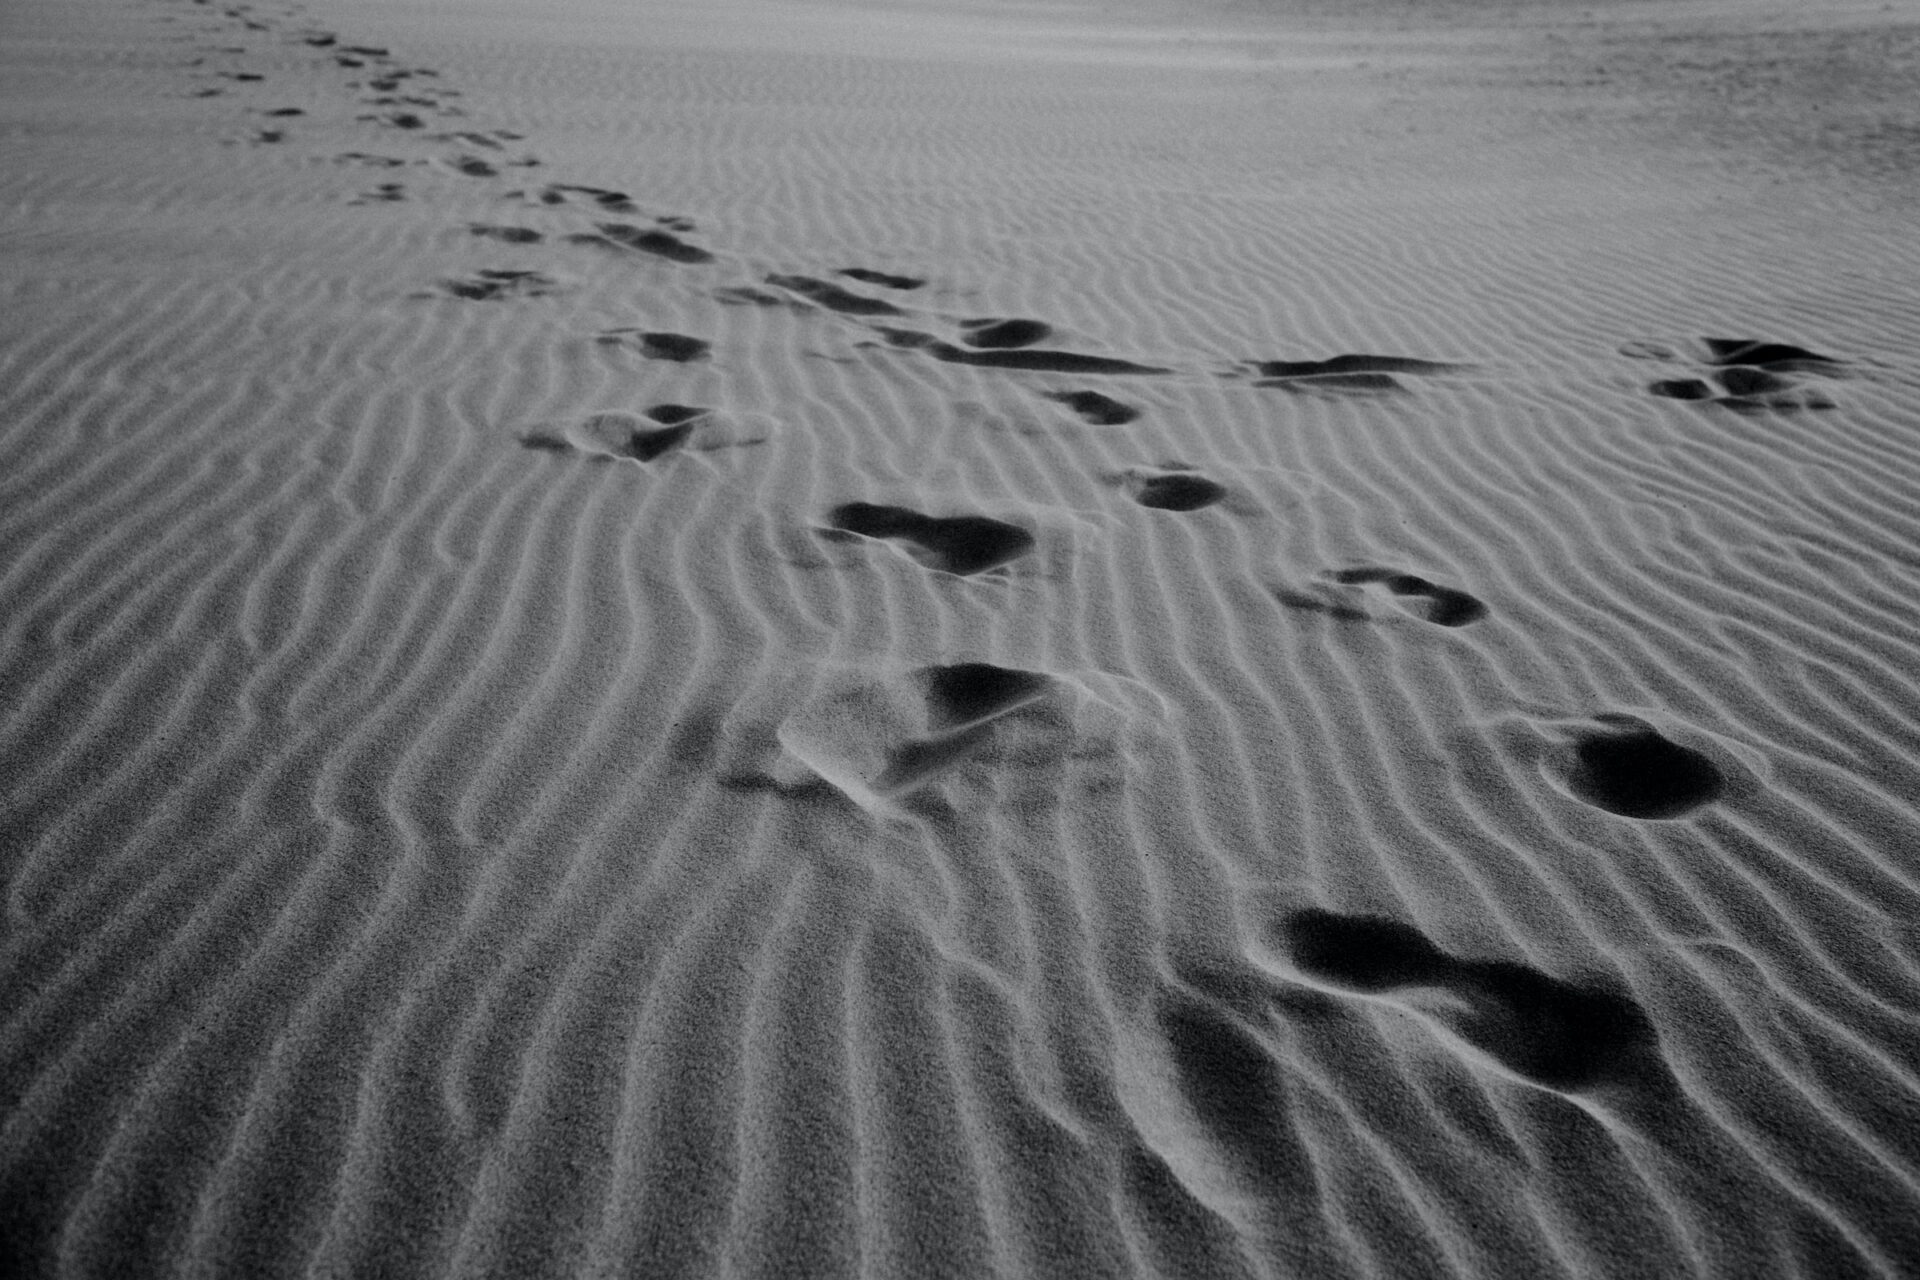 footprints on sand during the daytime